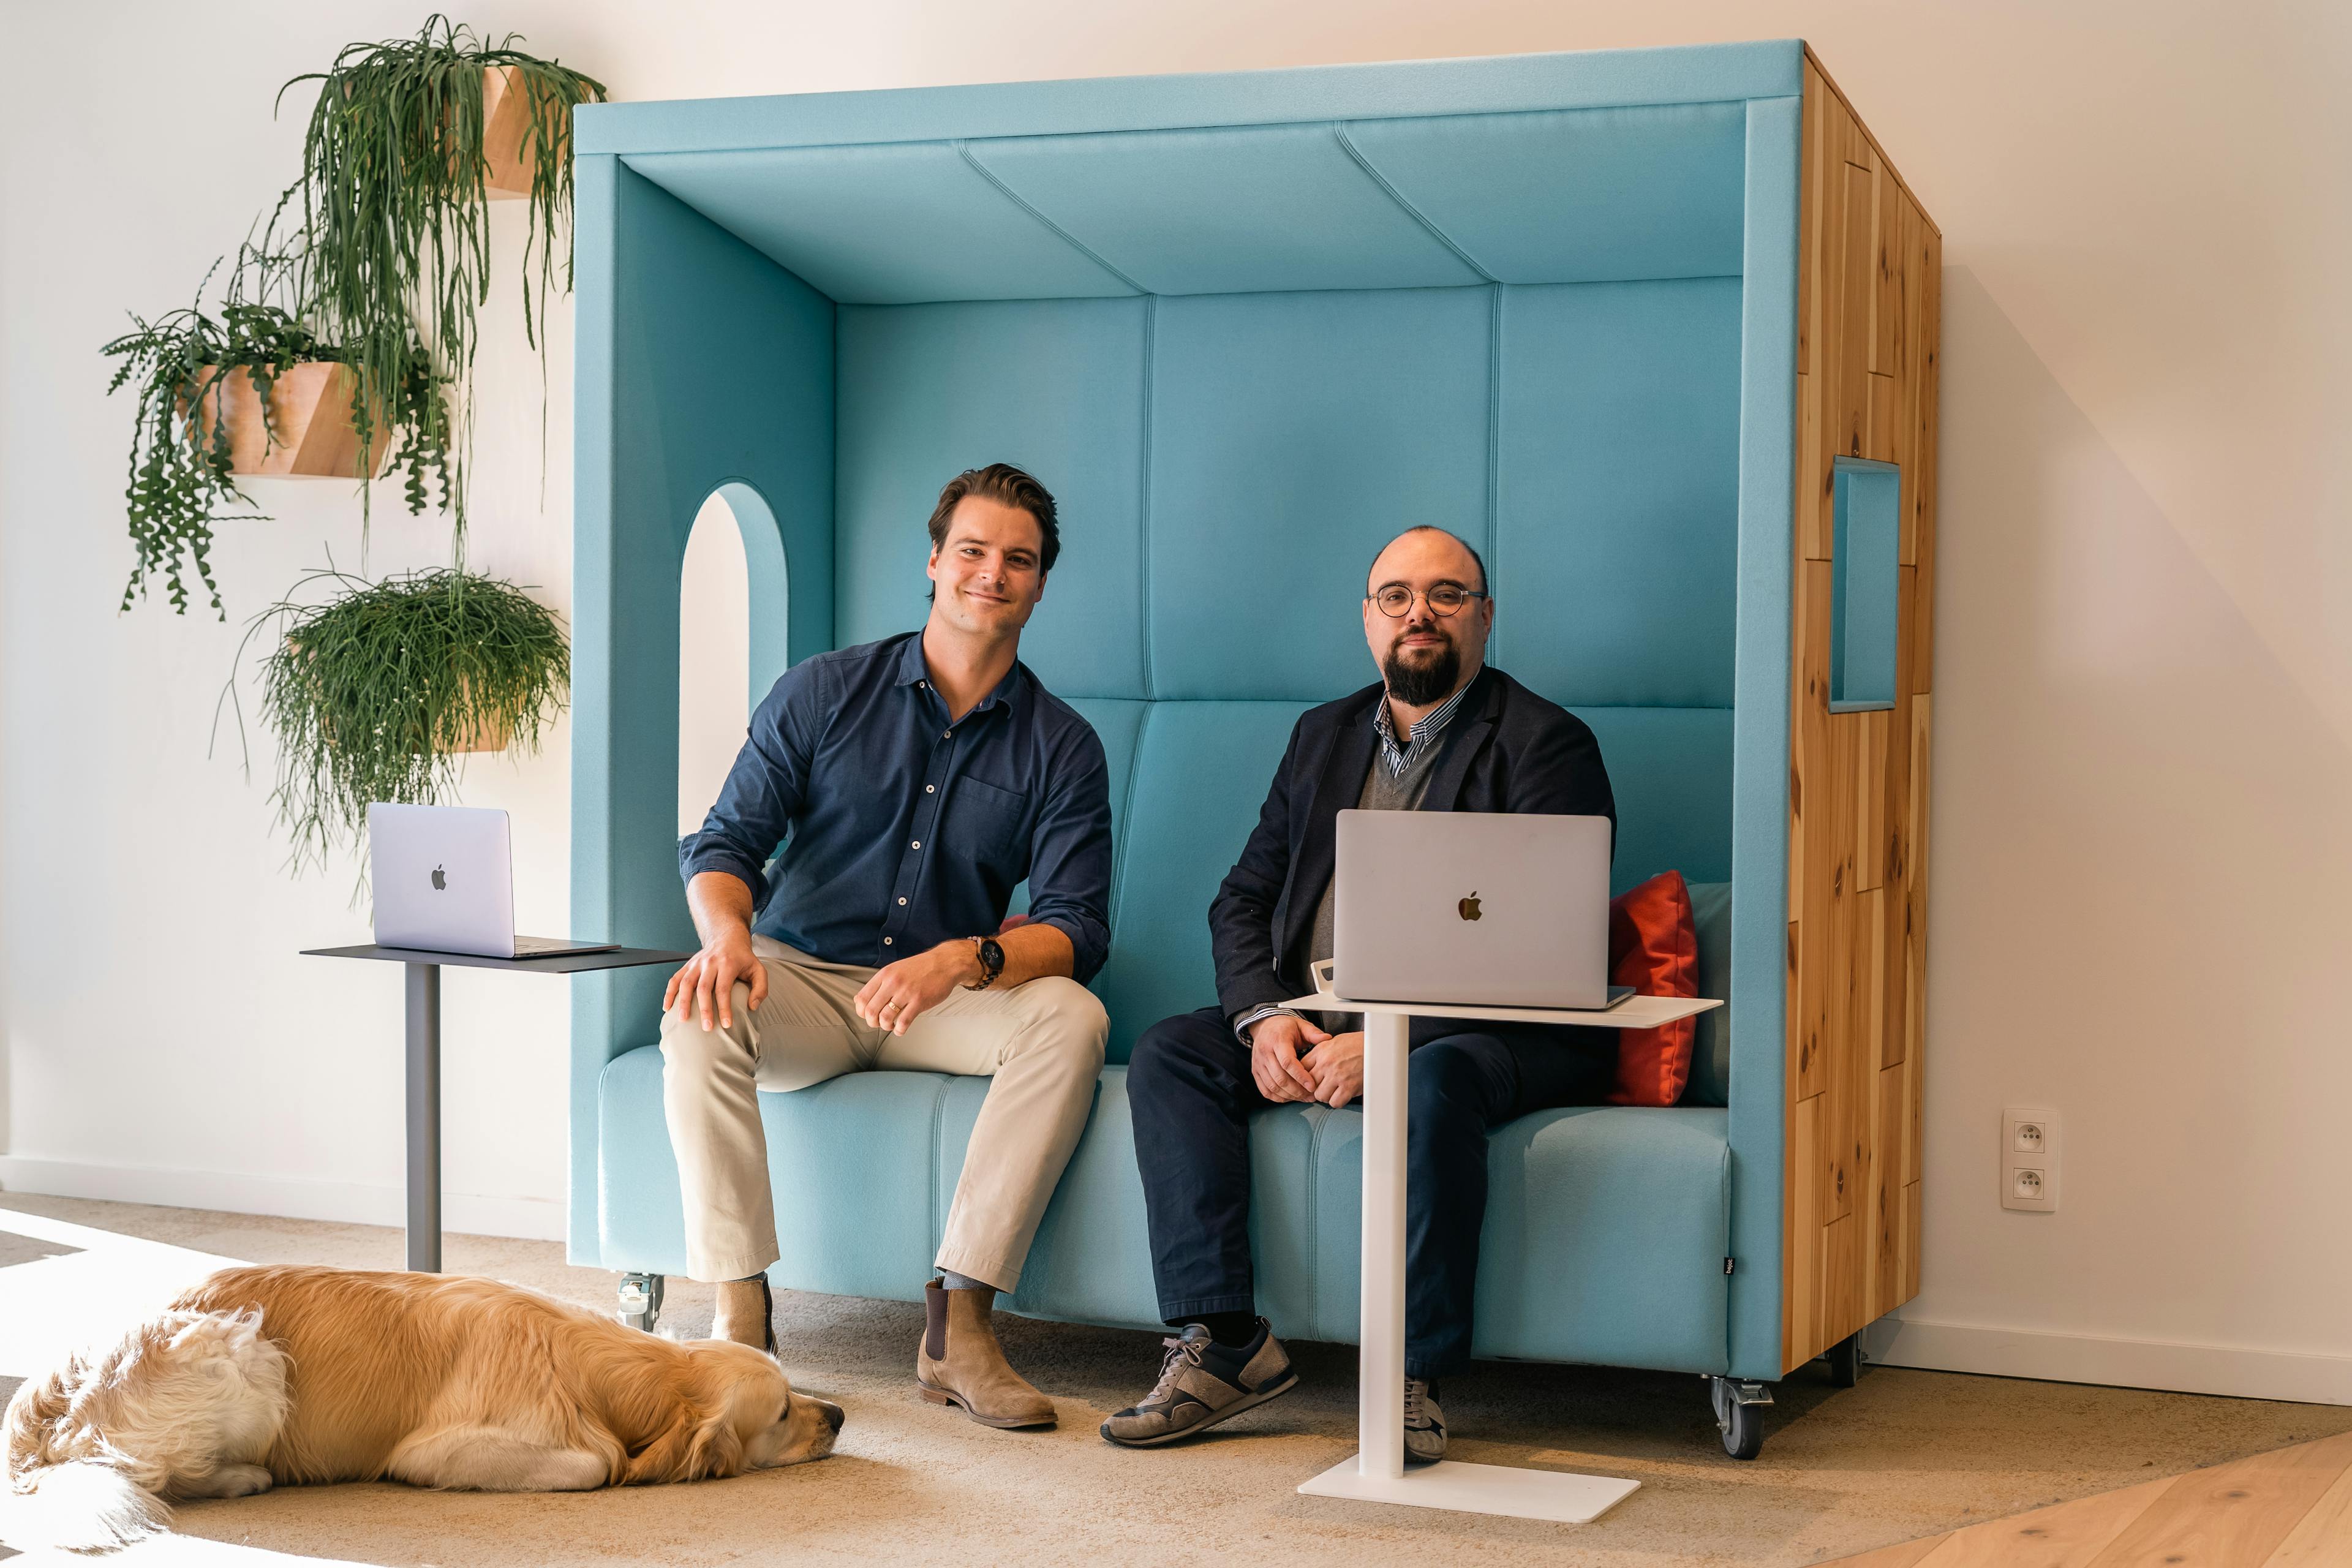 from left to right: Revend's office dog Remus, CEO Peter Wellens, and CTO Alex Reis